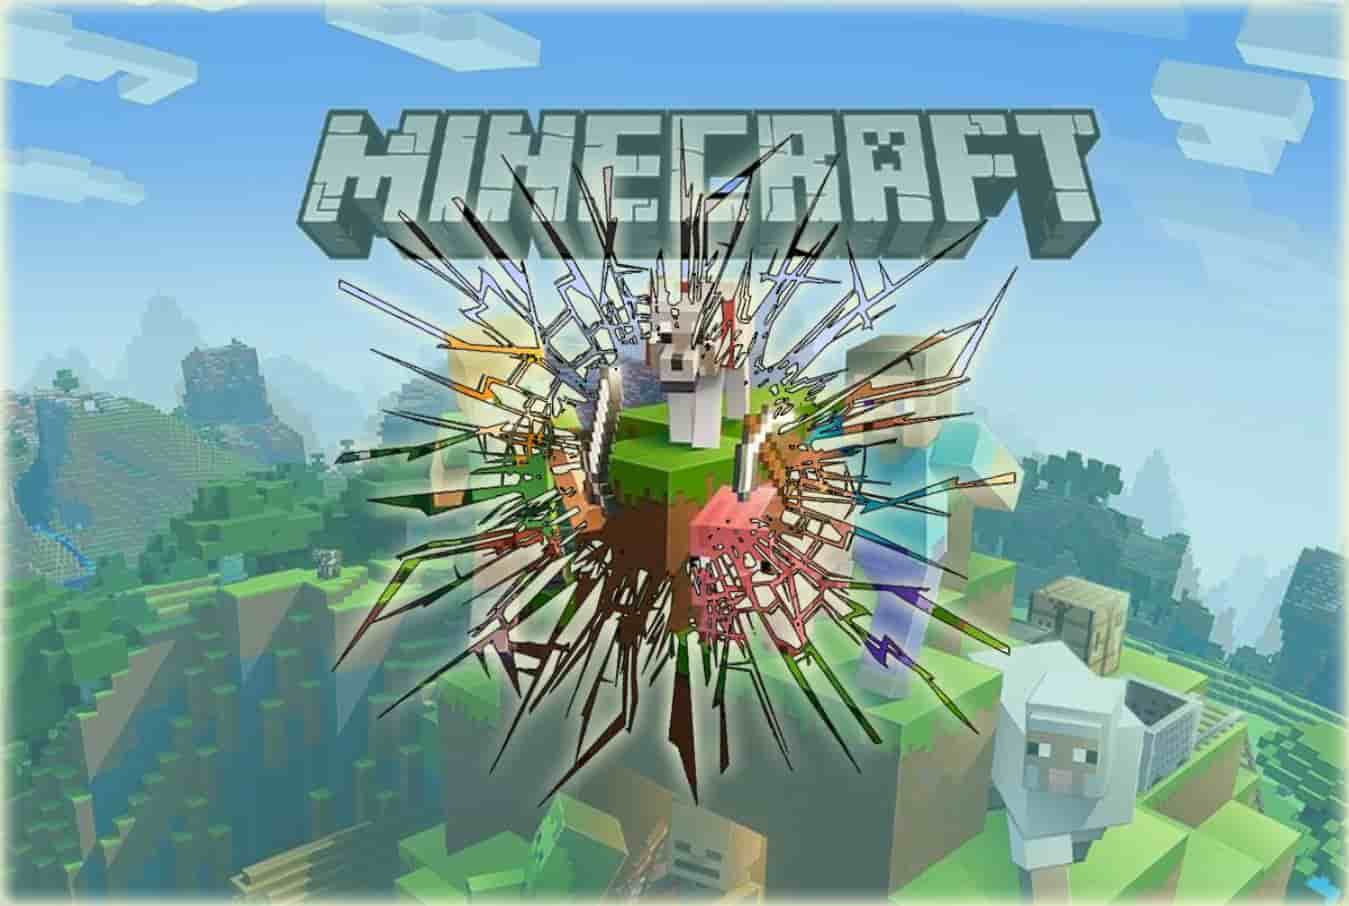 Minecraft declared the most malware-infected game